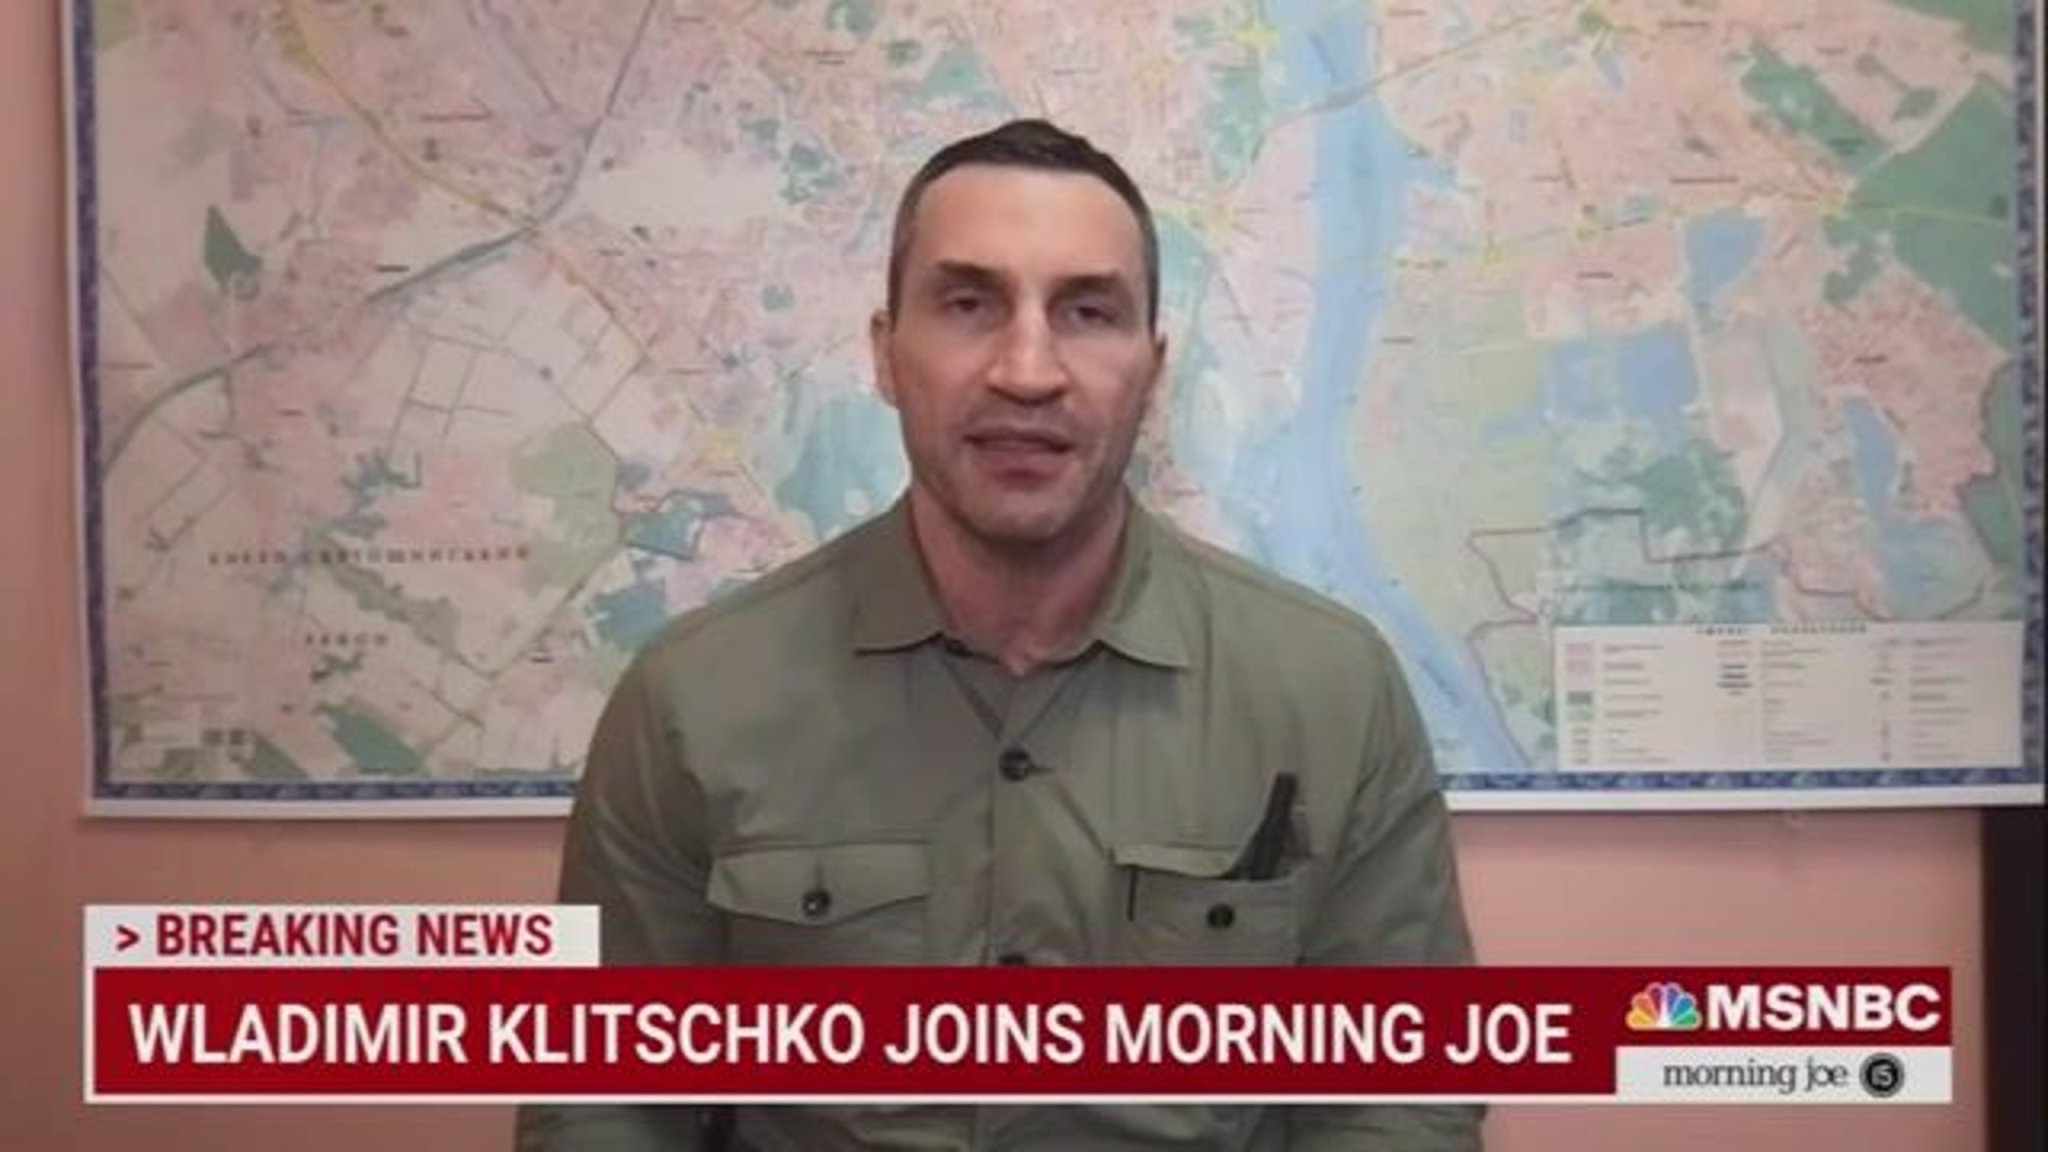 Fmr. heavyweight champ Klitschko on Russia targeting civilians: “Behind every crime there are people with names.”